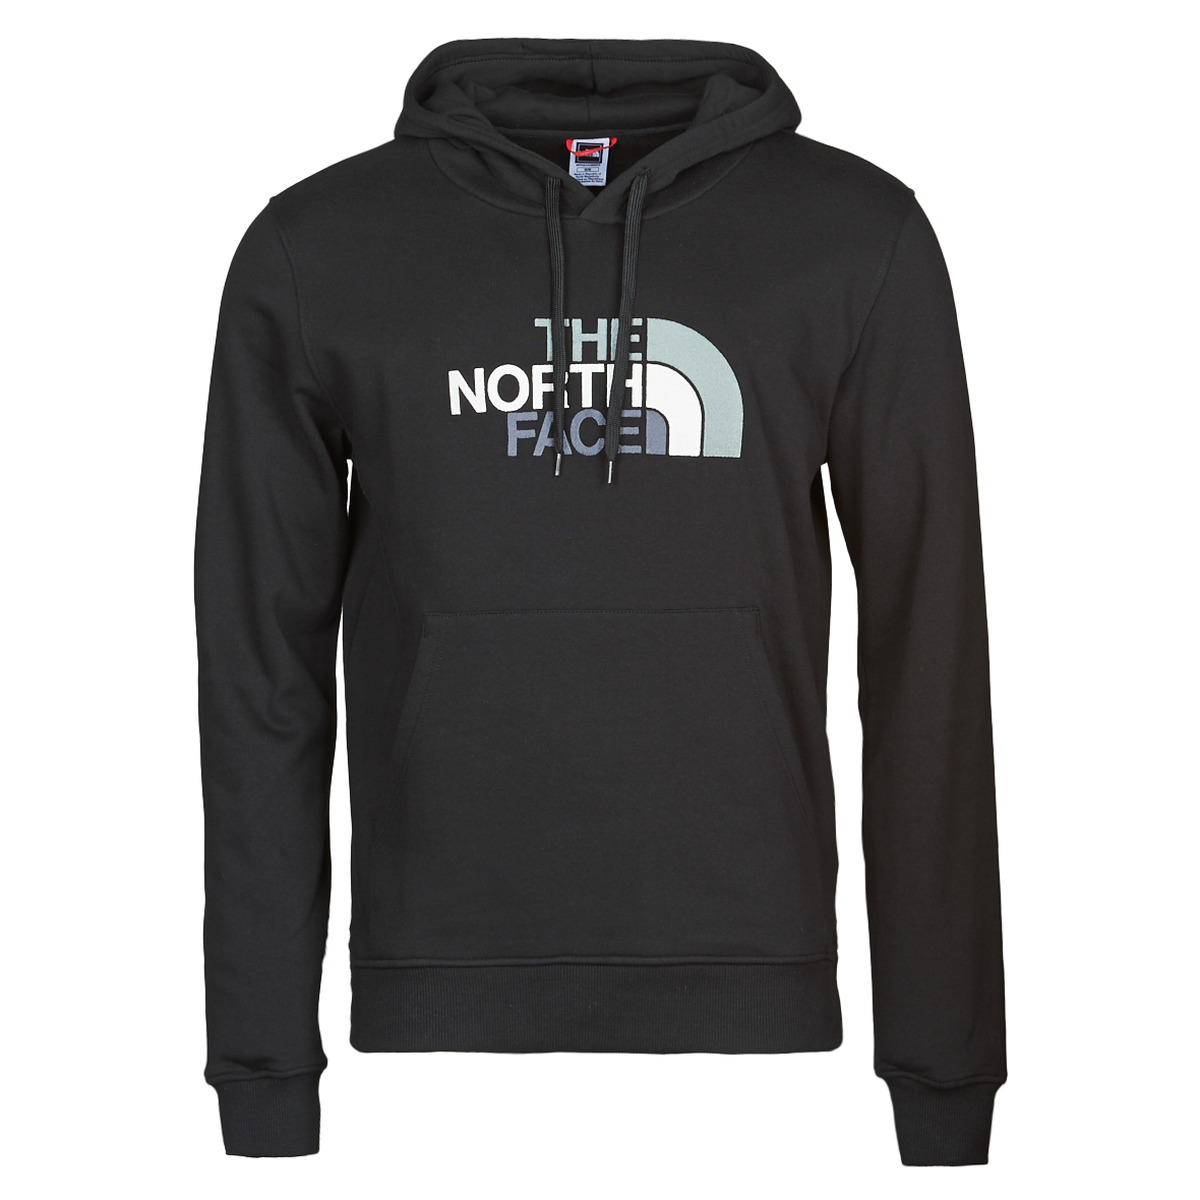 The North Face PULLOVER - delivery HOODIE Men Free - NET Clothing Spartoo PEAK | Black sweaters DREW 